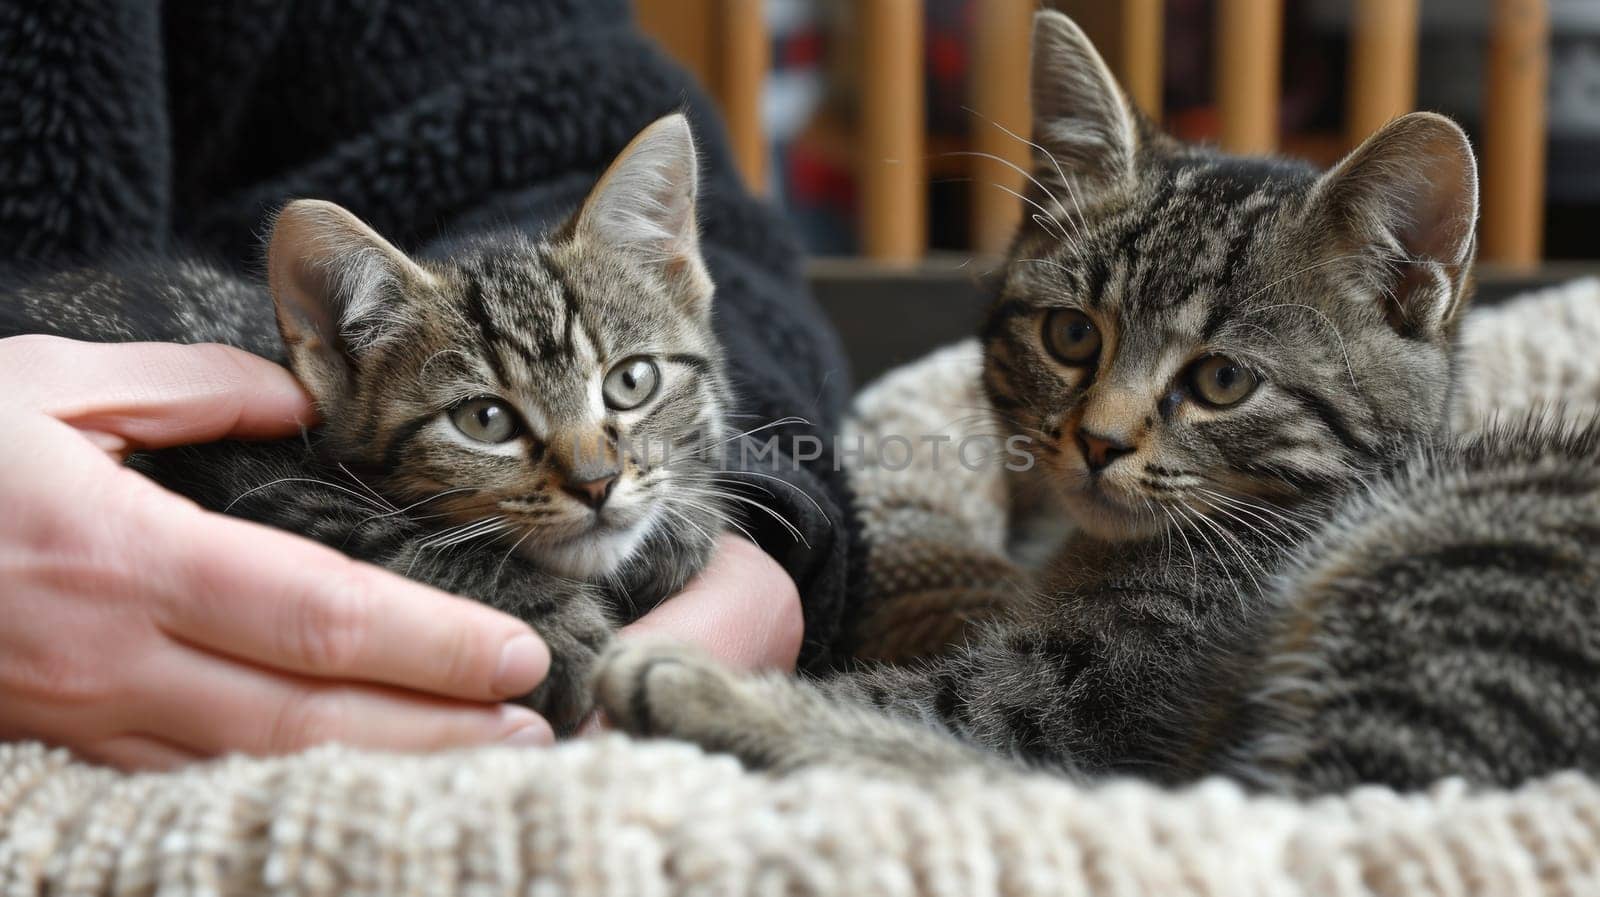 Two small gray and white striped kittens sitting on a blanket